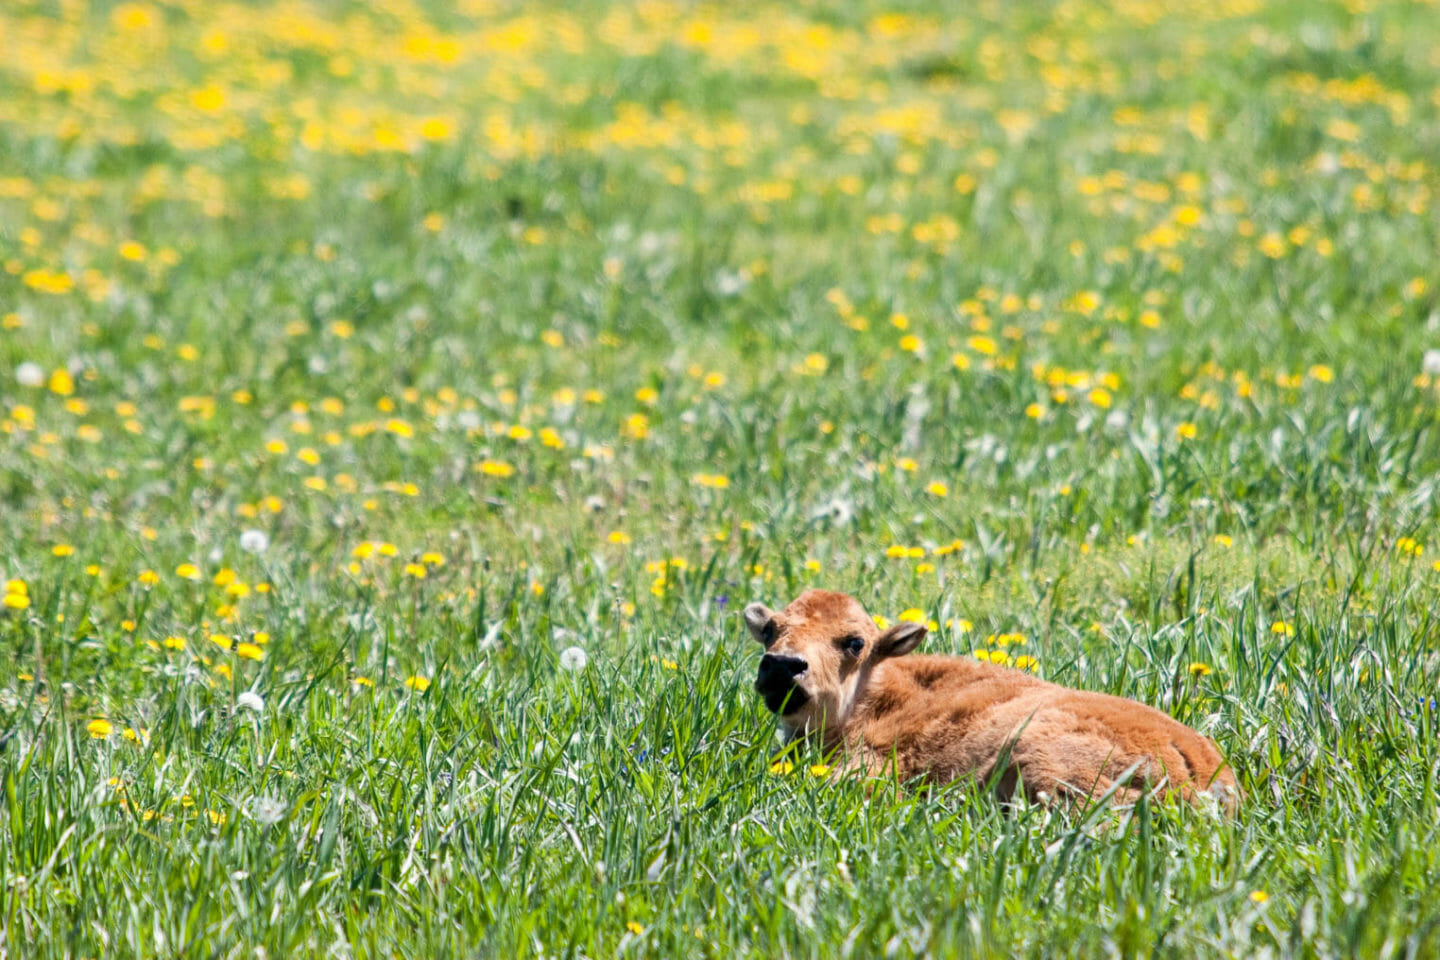 Bison calf laying in flowers in Yellowstone National Park